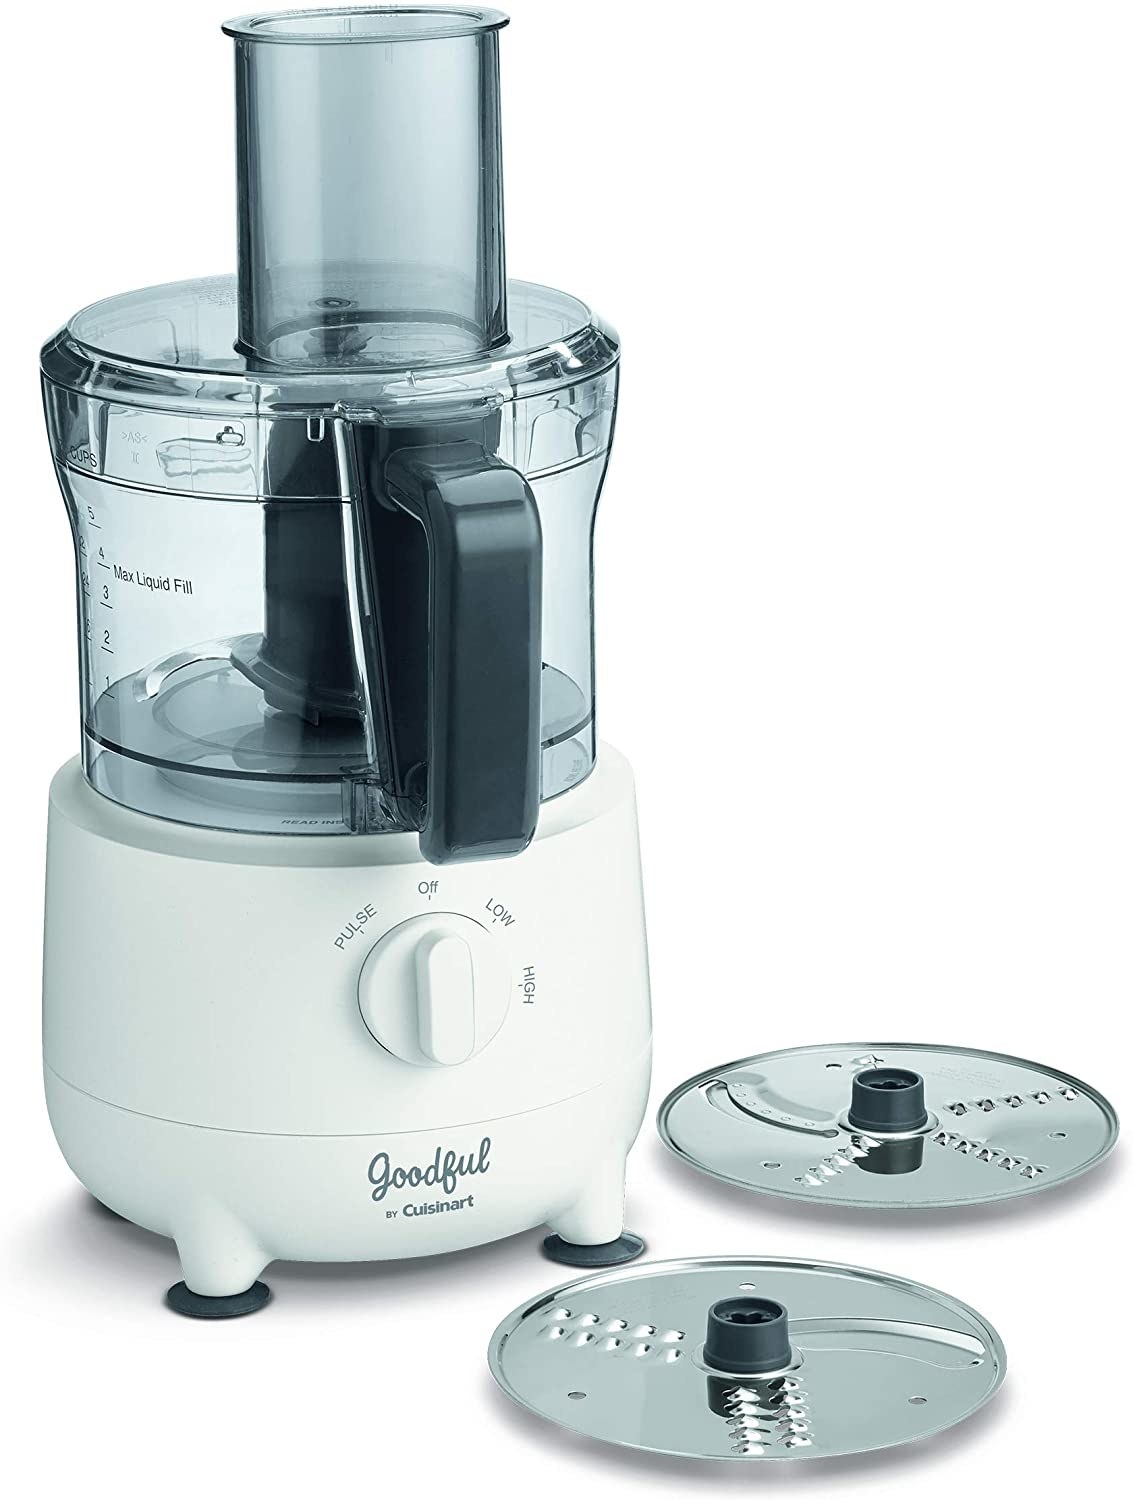 A food processor with a white base and control for pulse, low, or high rotary, with a reversible slicing and shedding disk